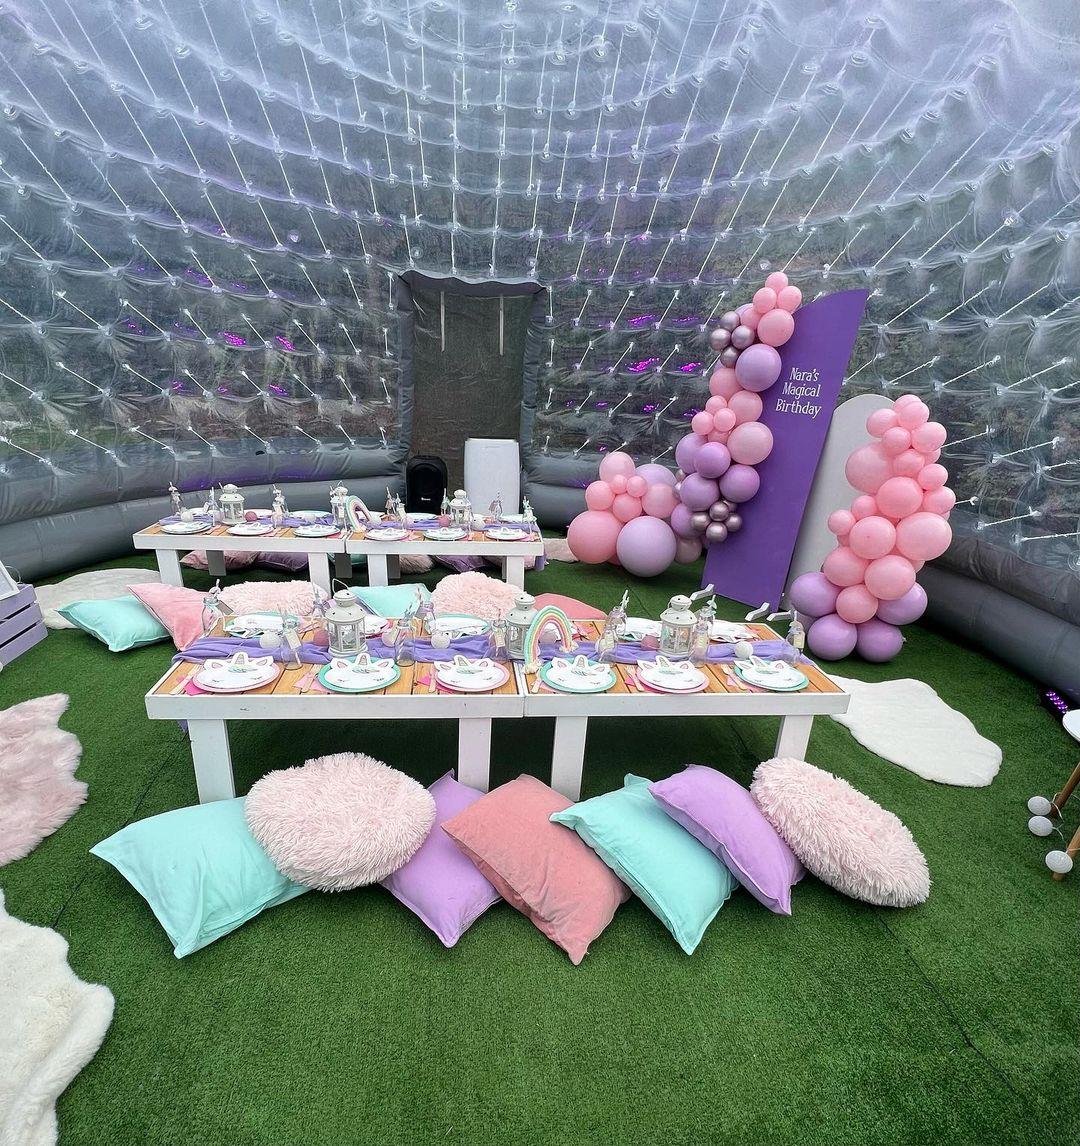 Surrey Enchanted Sleepovers - Sleepover party tents to hire in London